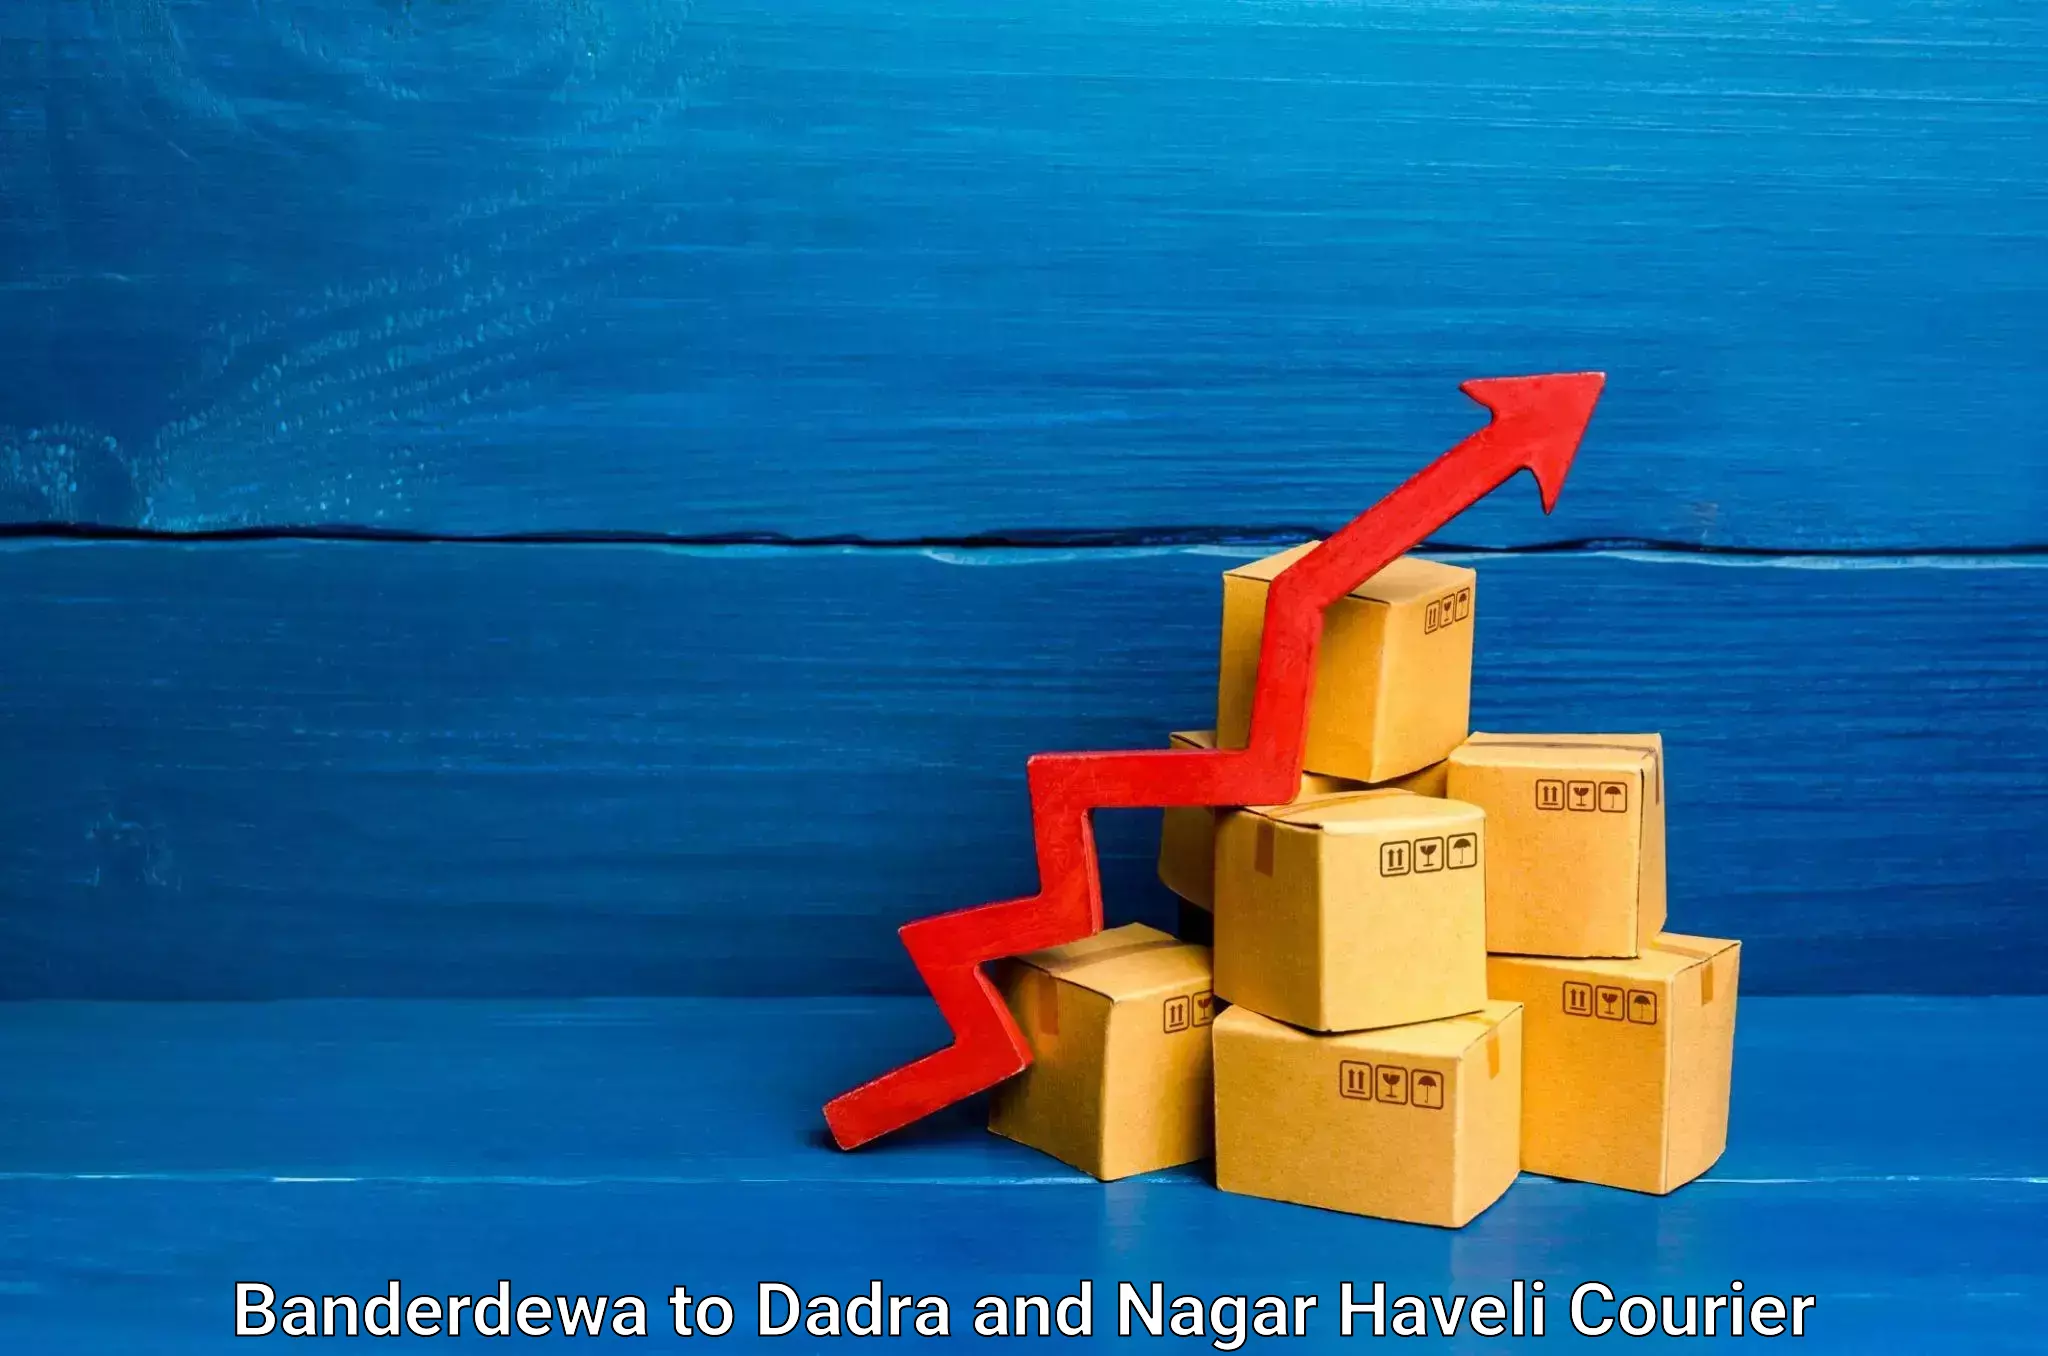 Overnight delivery services Banderdewa to Dadra and Nagar Haveli